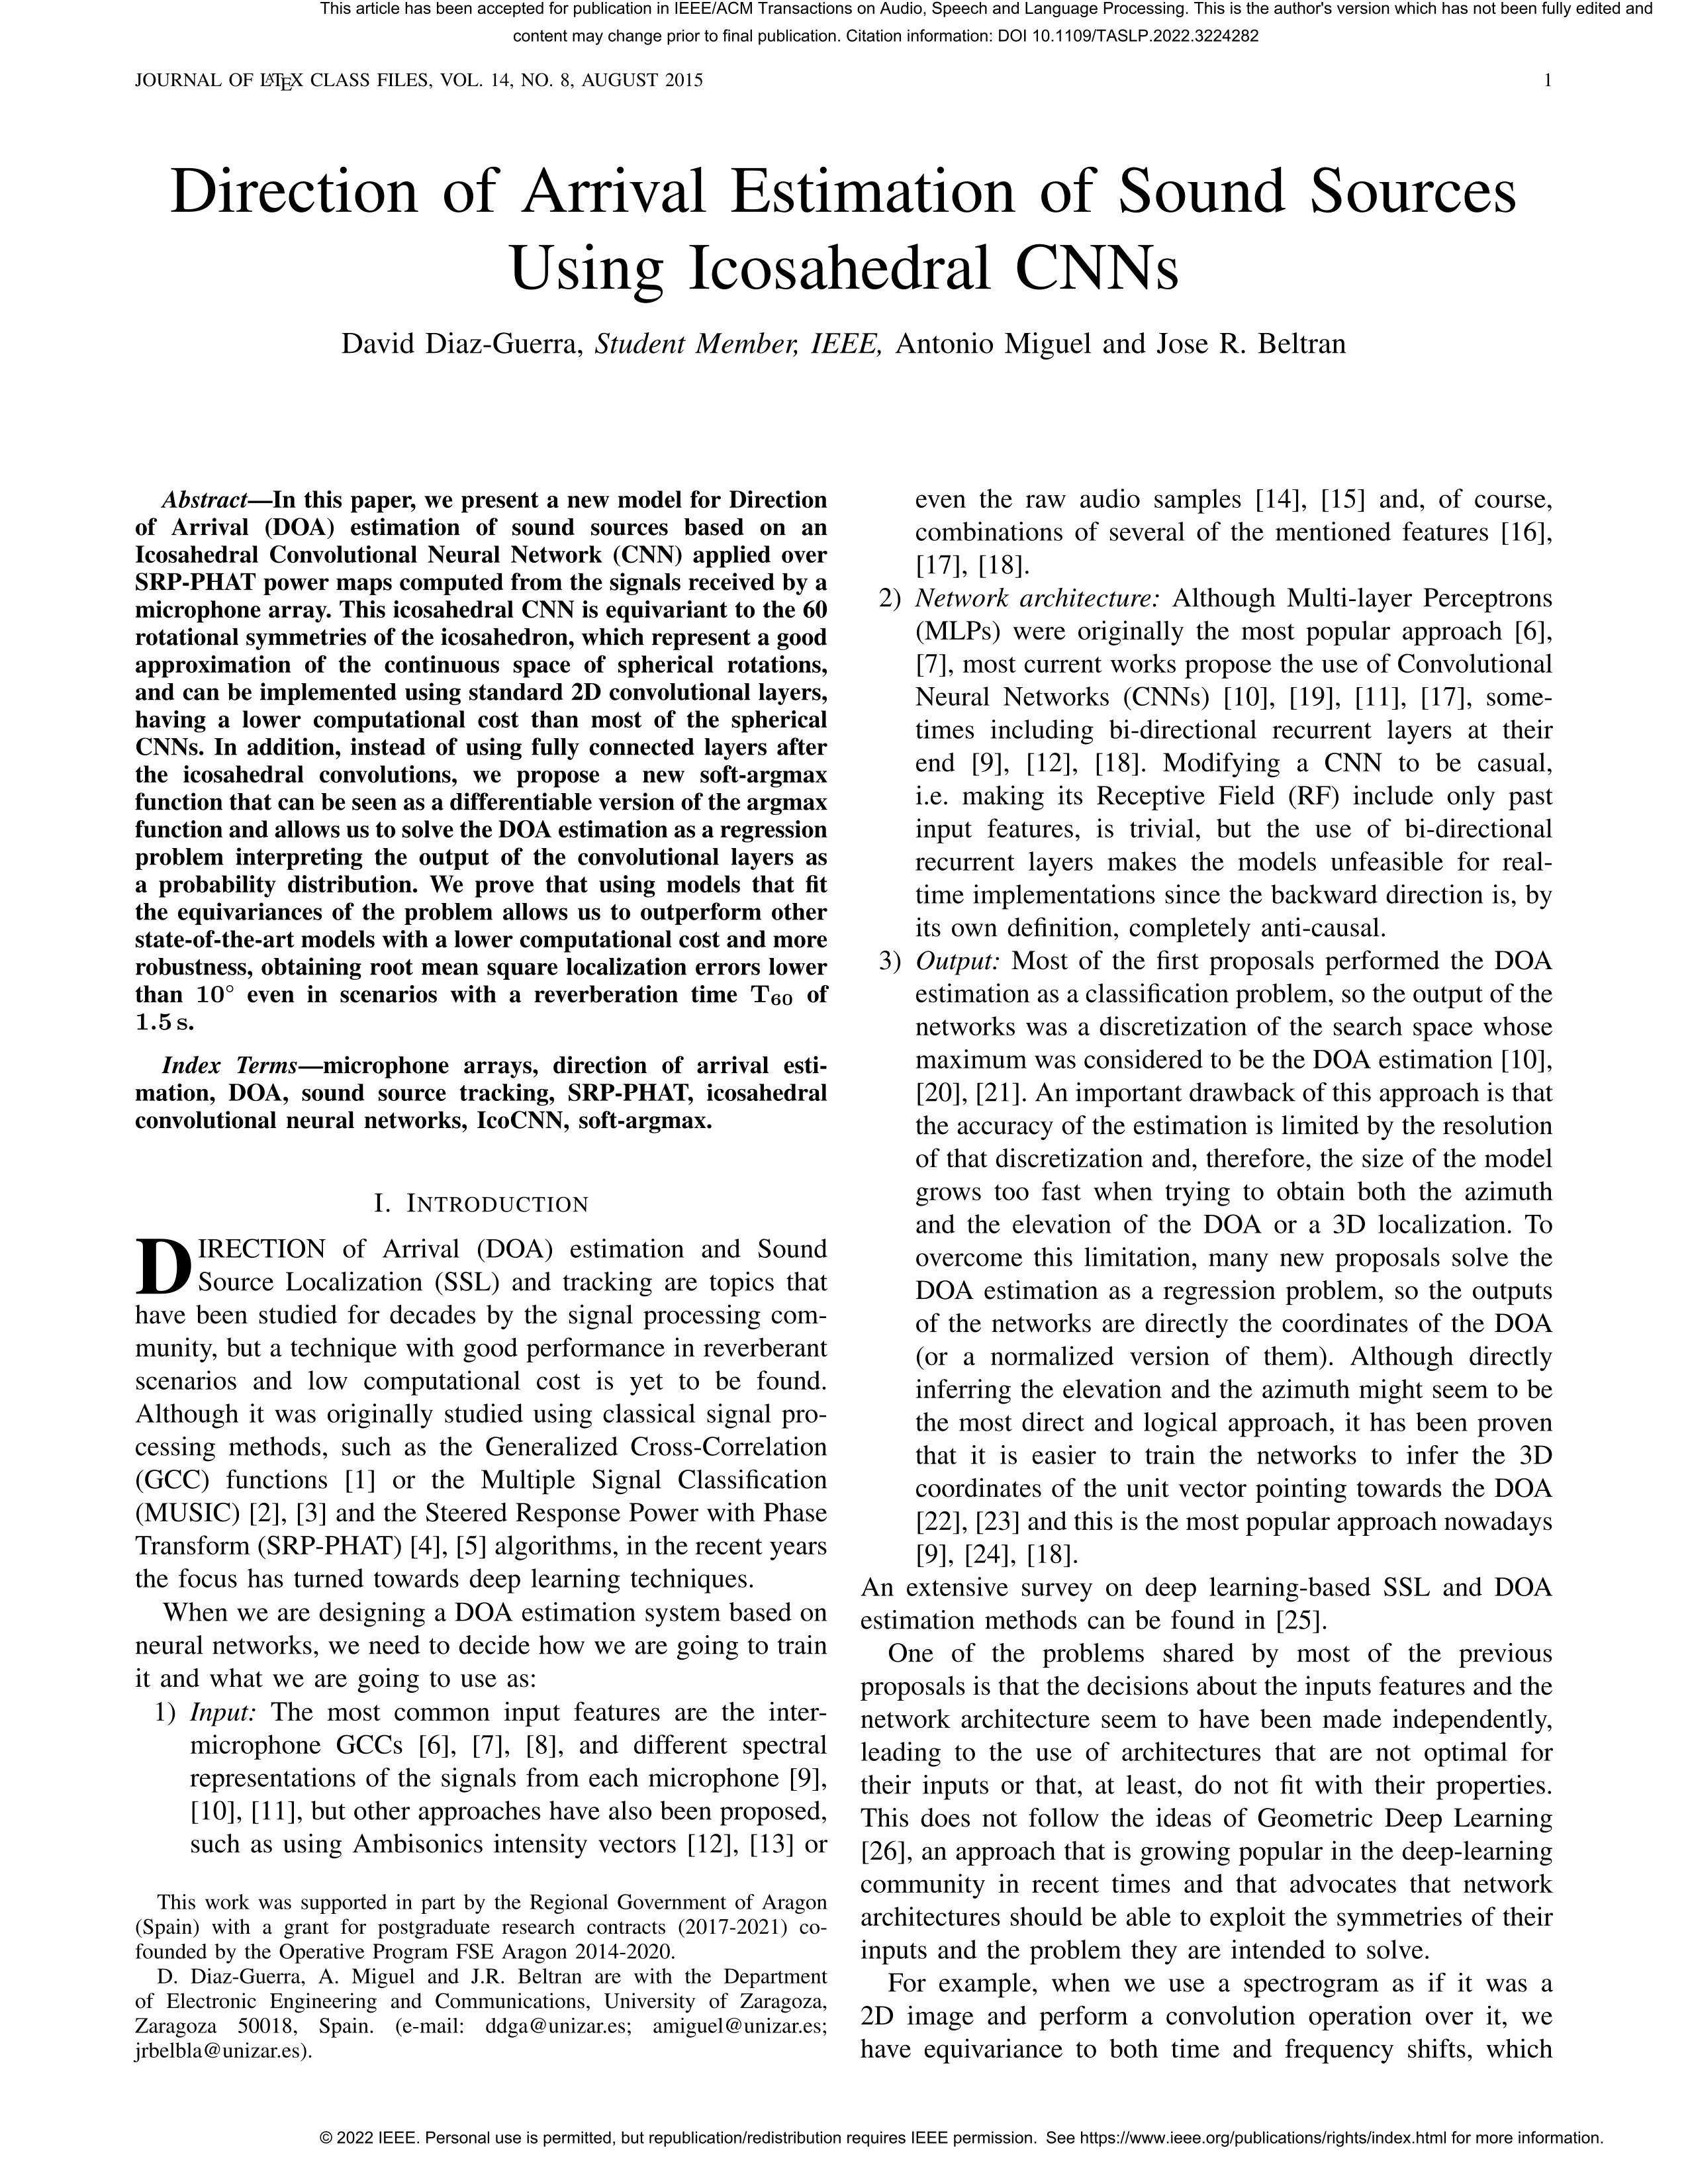 Direction of arrival estimation of sound sources using icosahedral CNNs